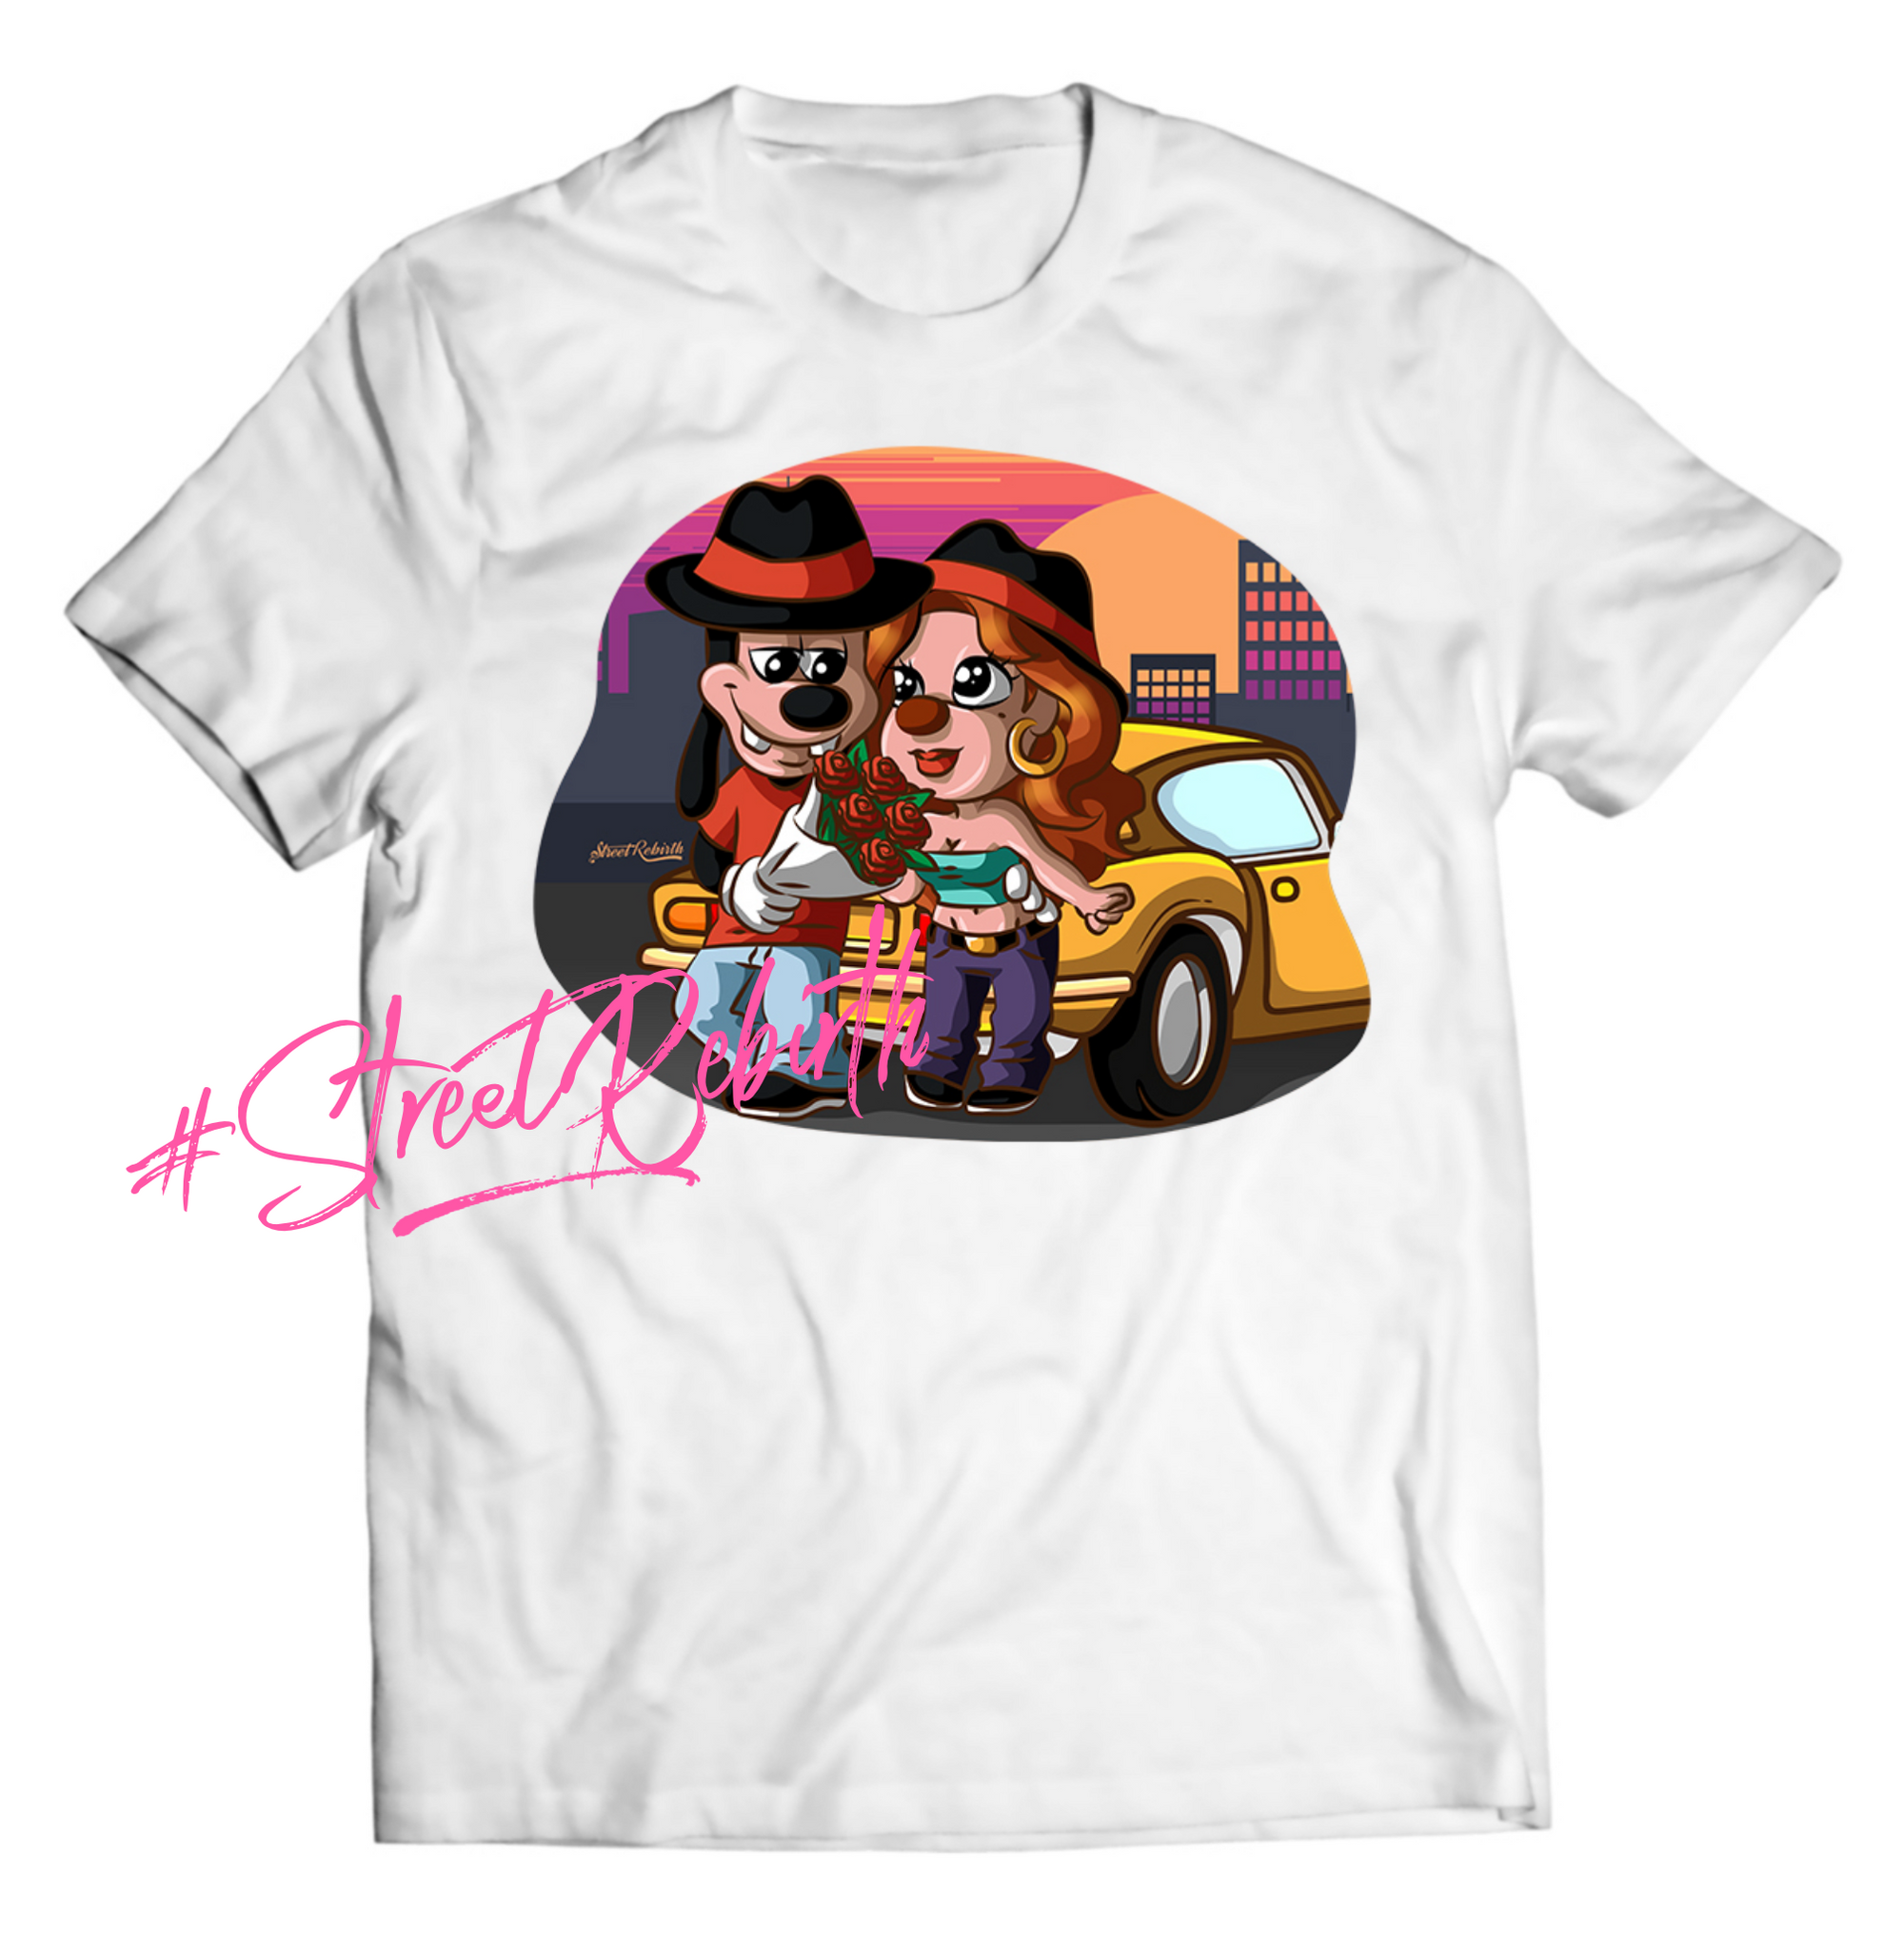 Max And Roxanne Ol Skool  Shirt - Direct To Garment Quality Print - Unisex Shirt - Gift For Him or Her